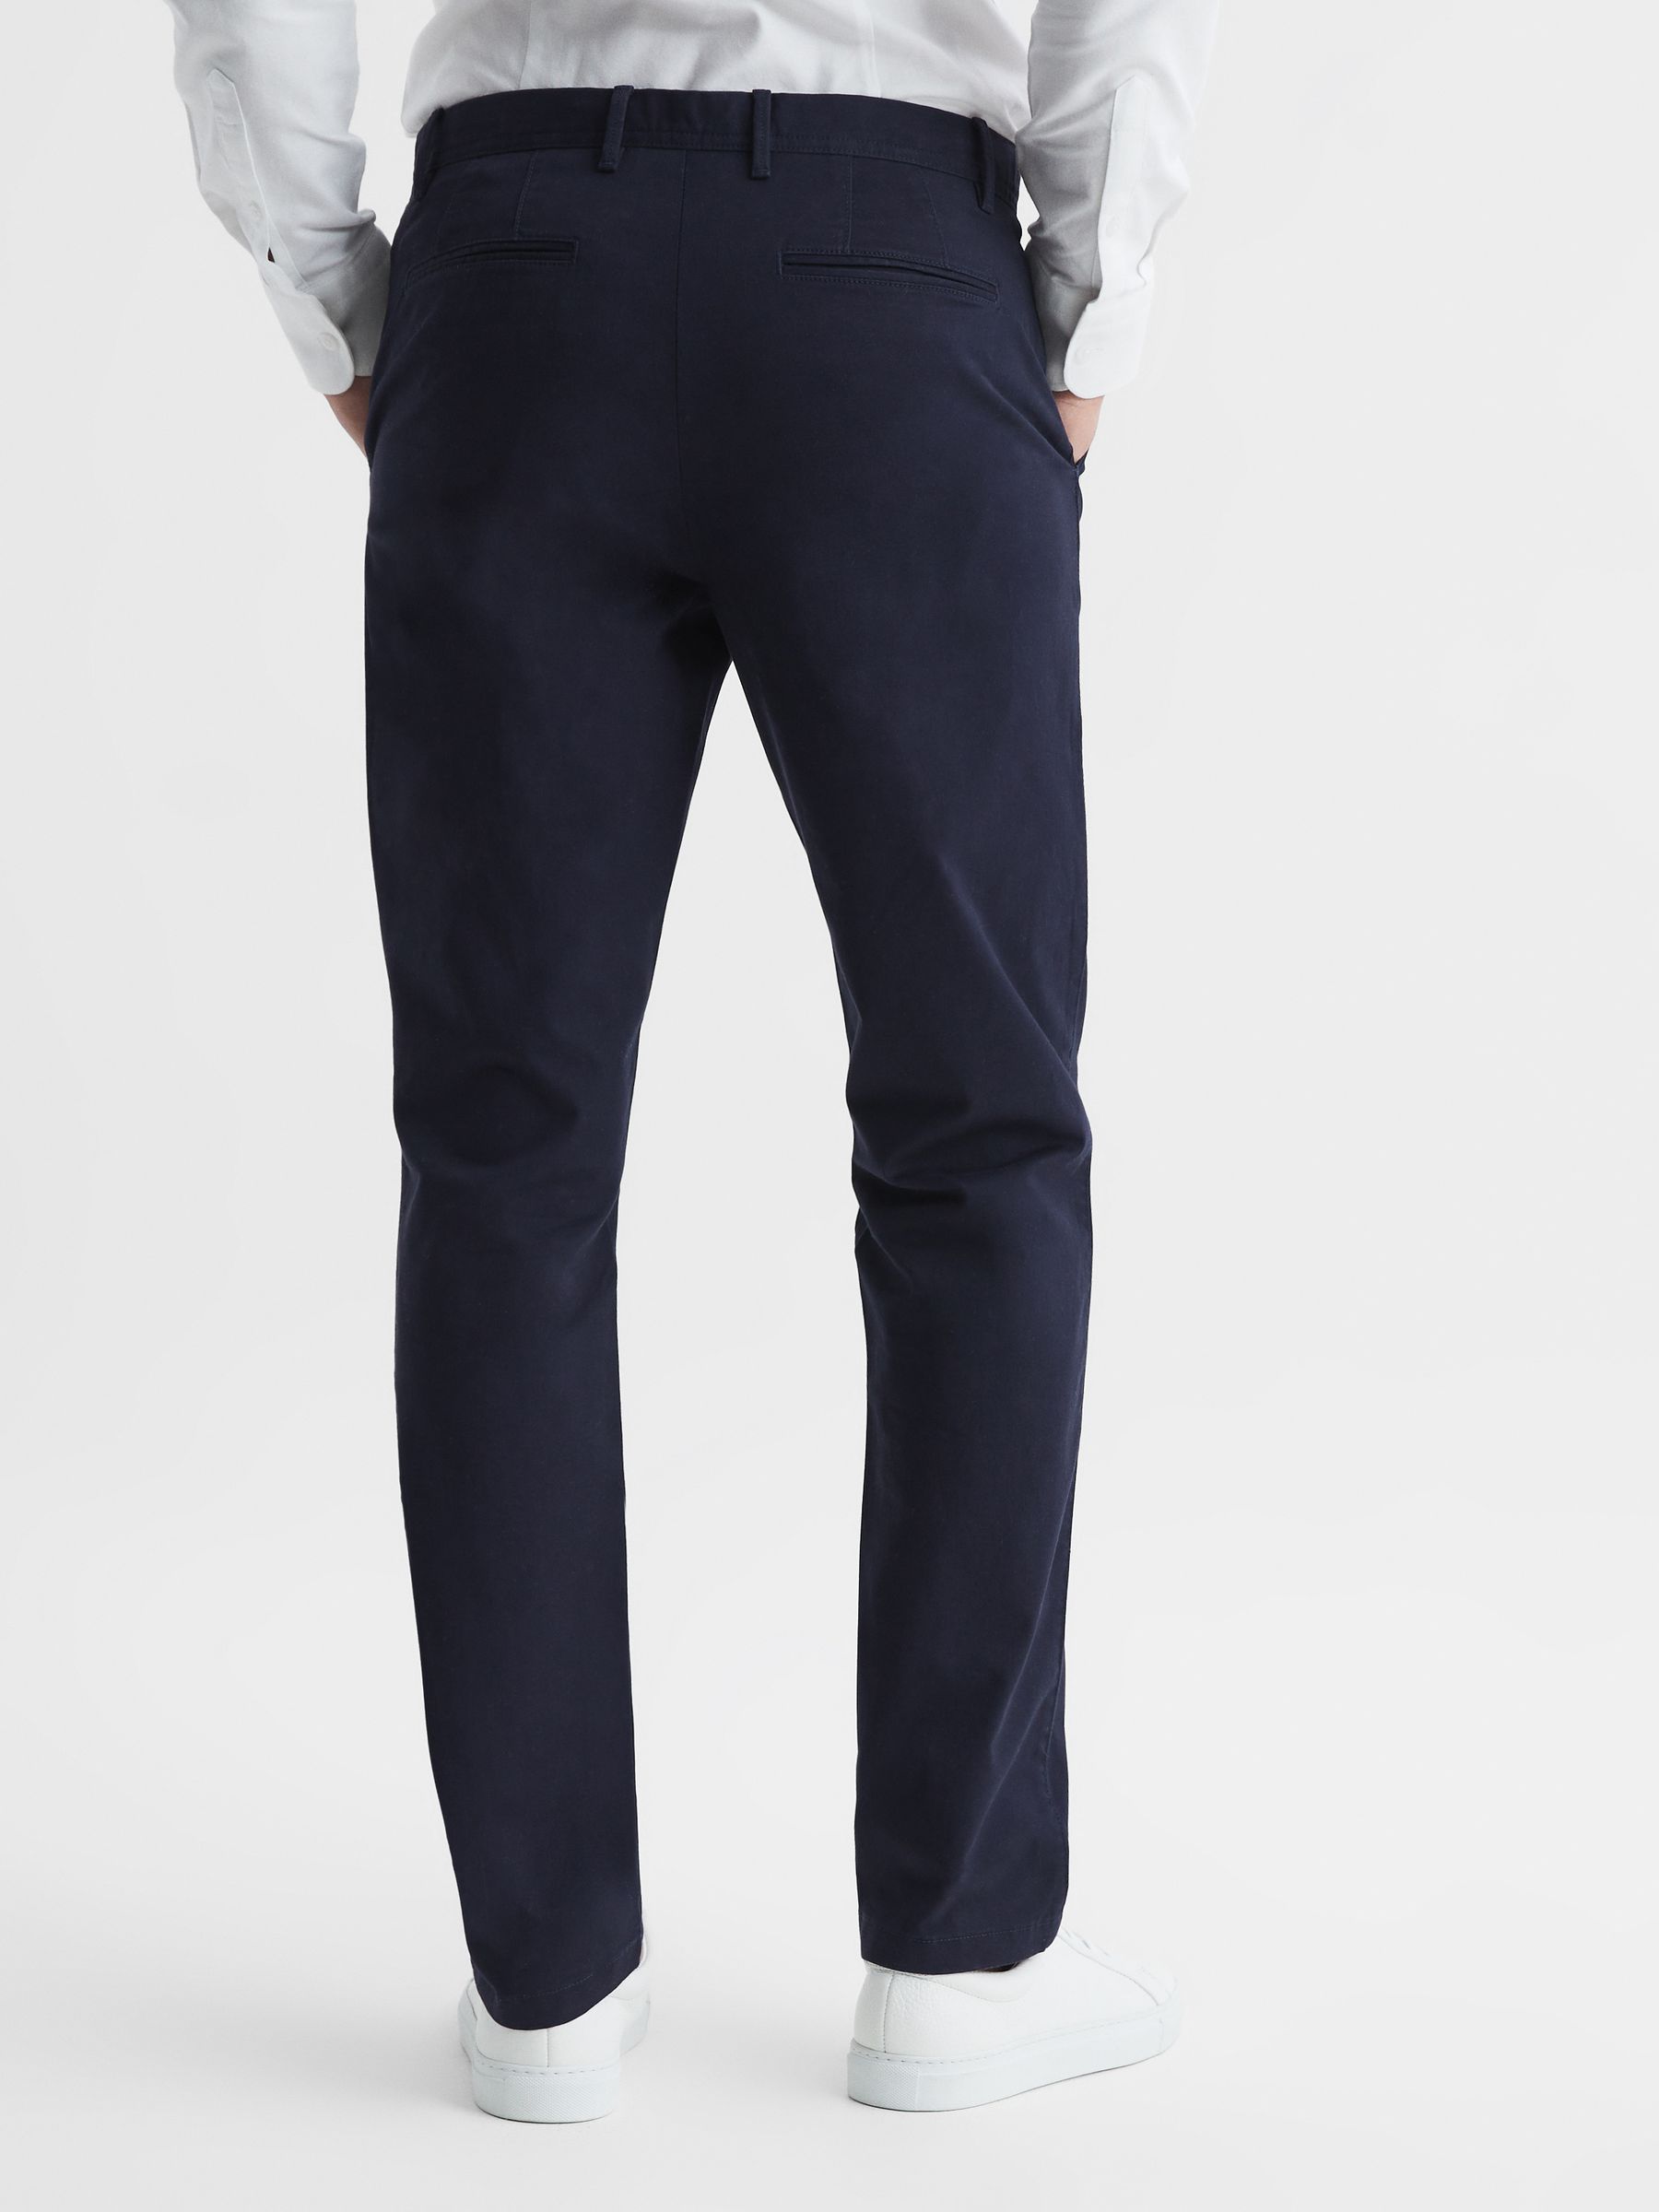 Reiss Pitch Slim Fit Washed Cotton Blend Chinos - REISS